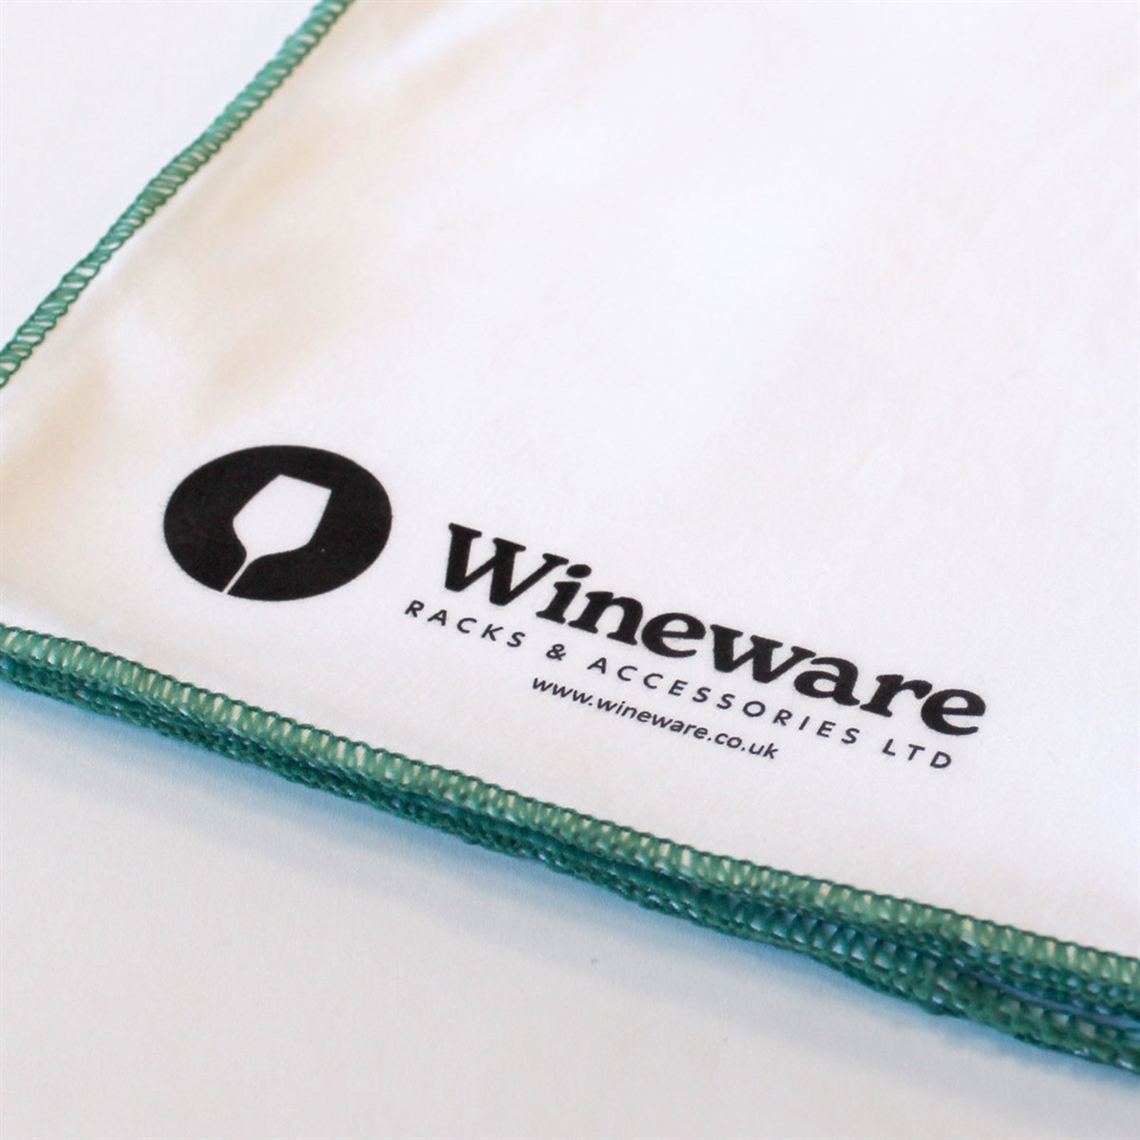 View more new york bar from our Wine Glass Cleaning & Accessories range